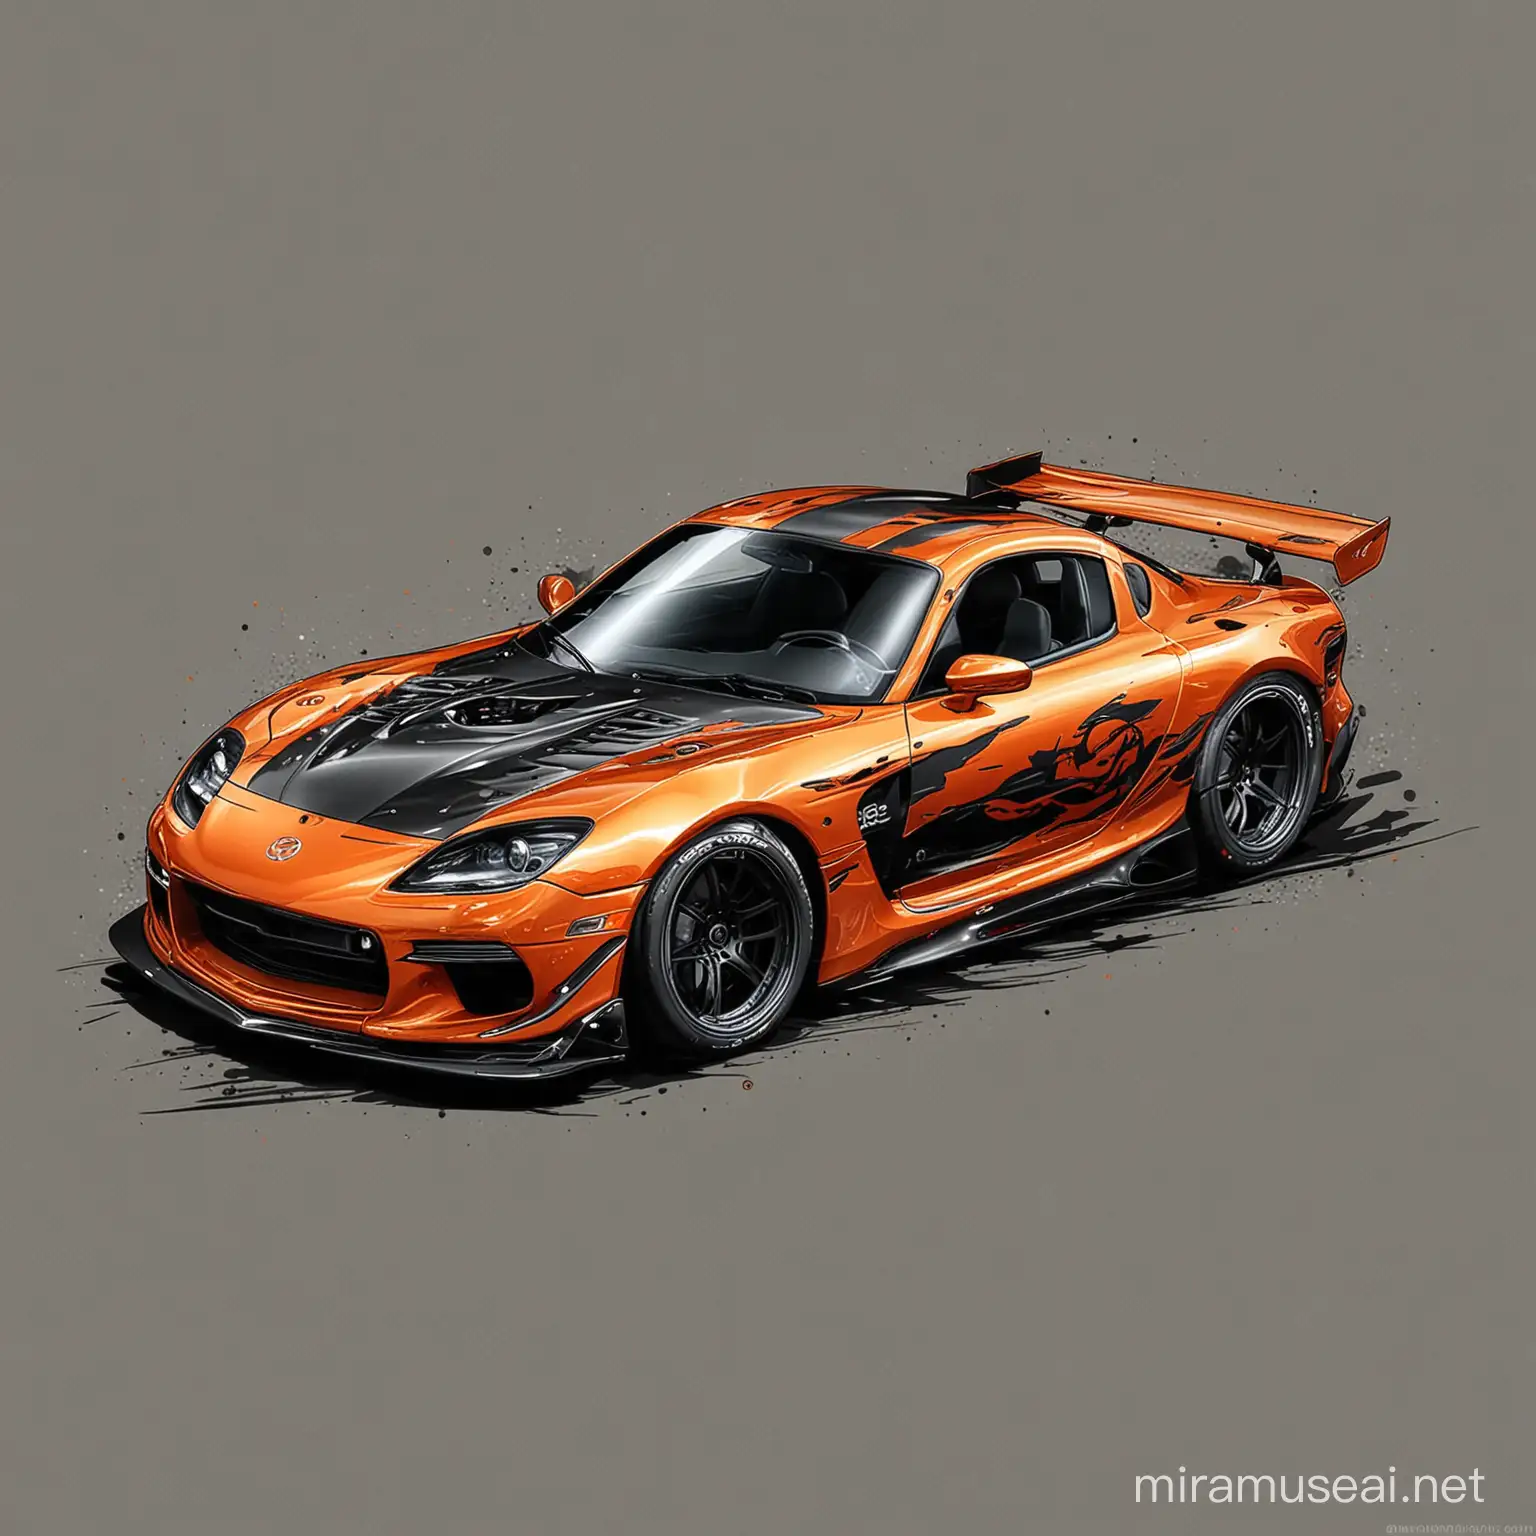 
Title: "Dragon's Fury: Custom Black and Orange Mazda RX-7 Build"

Description:
Imagine a mesmerizing design featuring a custom-built Mazda RX-7, adorned in a striking black and orange color scheme that exudes power and ferocity. Against the backdrop, an intricate outline of a dragon's face emerges, its piercing gaze and menacing silhouette adding an element of mystique and intrigue to the composition. With meticulous attention to detail and a passion for automotive excellence, this design captures the essence of speed, adrenaline, and untamed energy. Perfect for enthusiasts who appreciate bold and dynamic style, this t-shirt design is sure to turn heads and ignite the imagination.